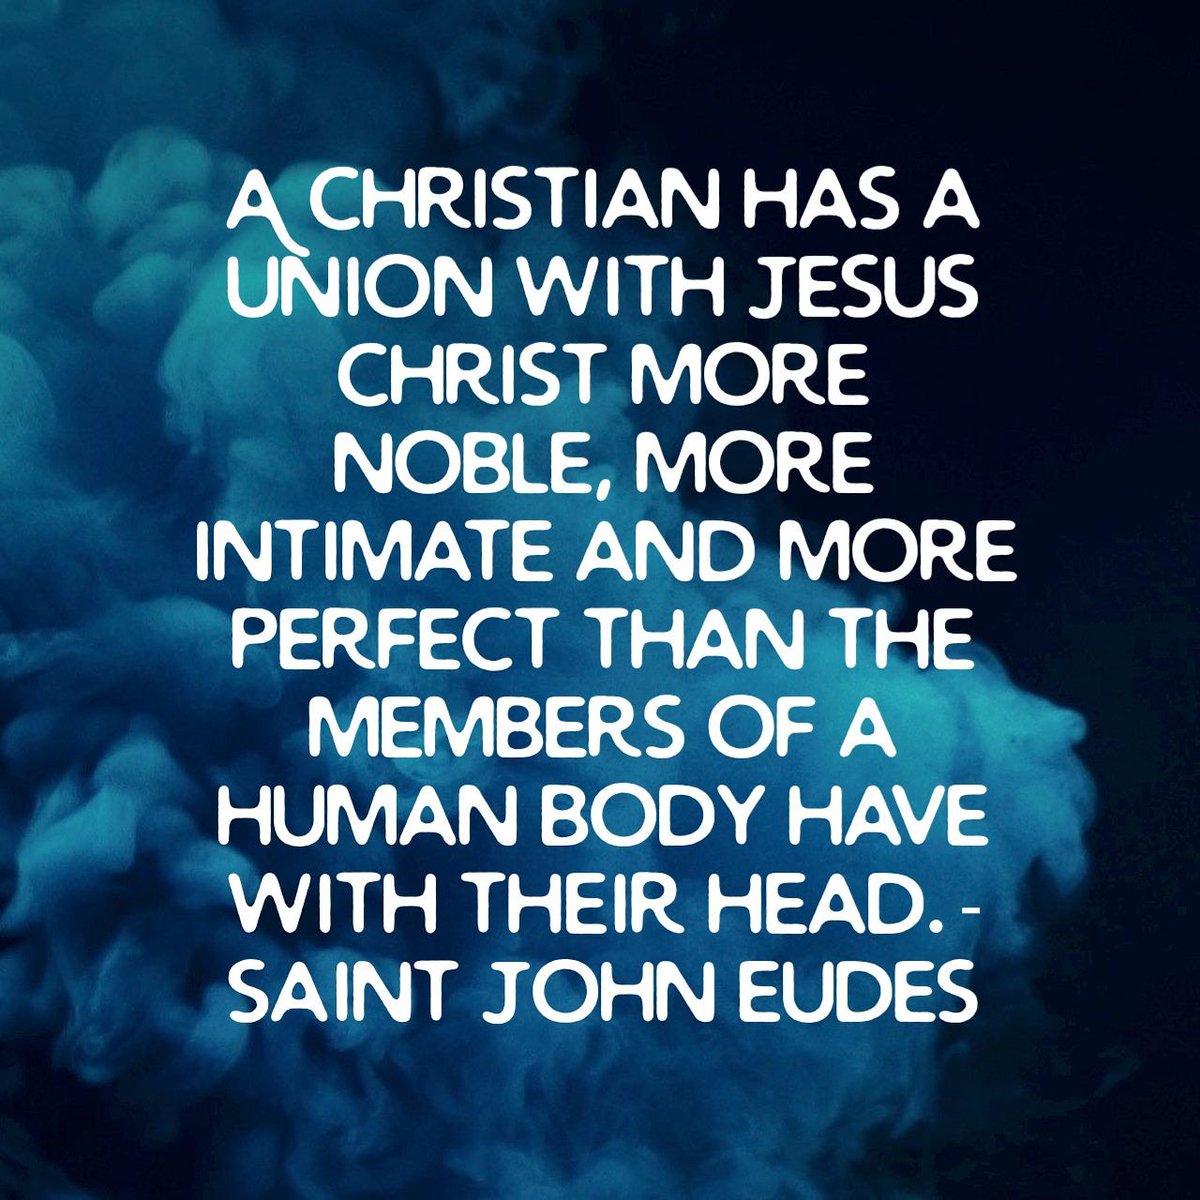 A Christian has a union with Jesus Christ more noble, more intimate and more perfect than the members of a human body have with their head. - Saint John Eudes
#SayingsOfTheSaints 
#SaintOfTheDay 
#SaintJohnEudes 
bibleversesonjesus.blogspot.com